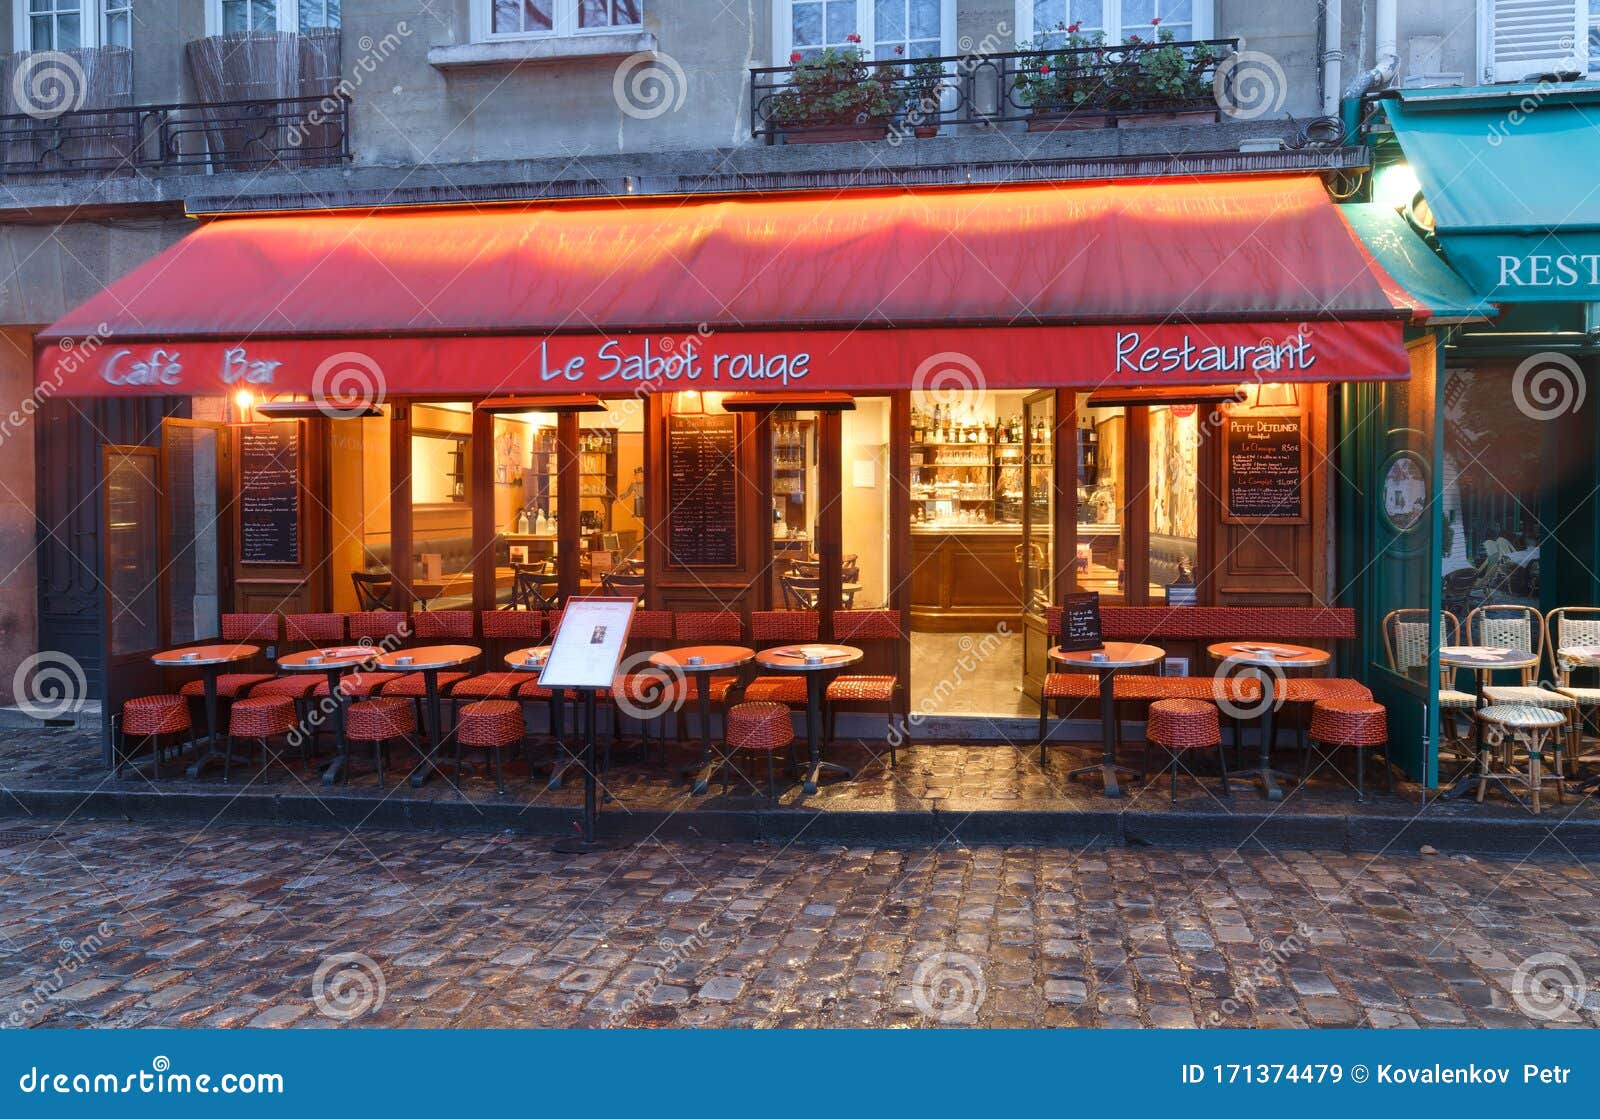 Cafe Le Sabot Rouge at Rainy Morning . it is a Traditional French Cafe ...